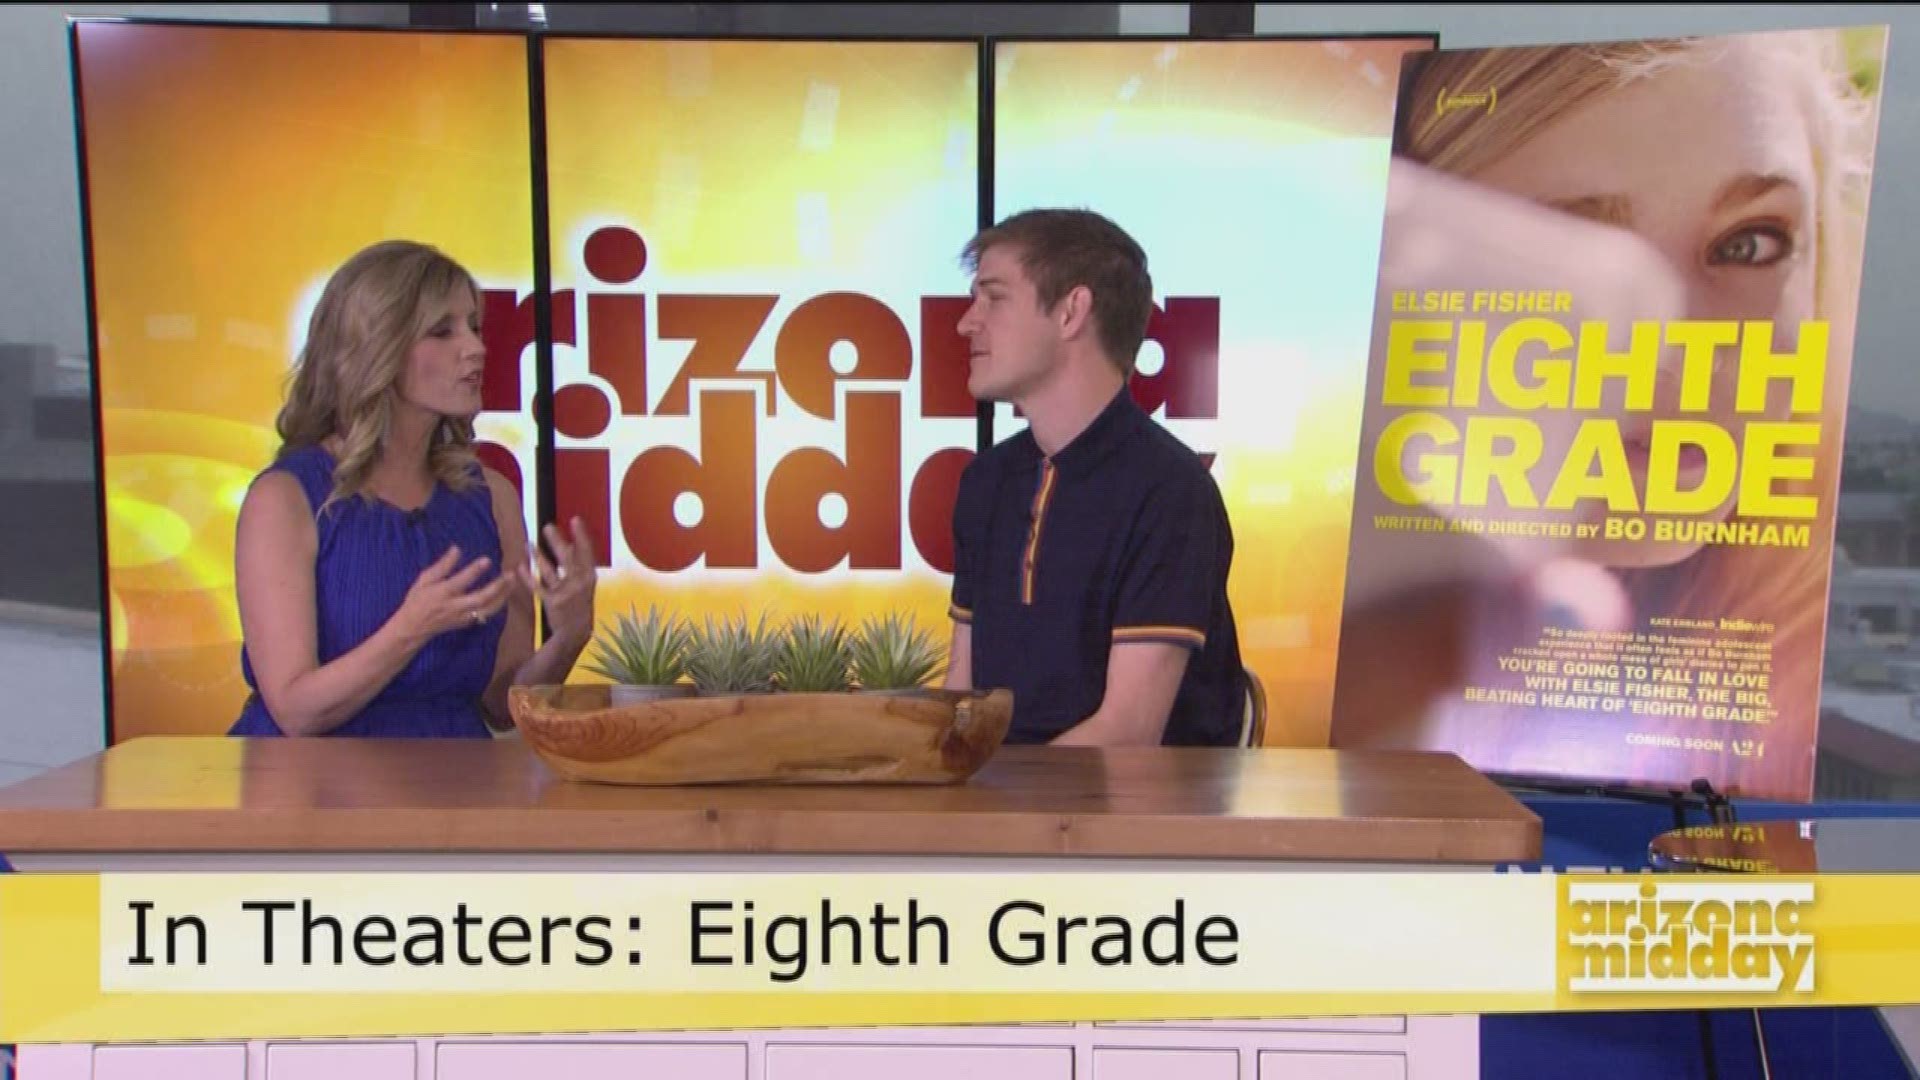 Bo Burnham, writer and director of 8th Grade, sits down with us to talk about his inspiration for the film and much more.